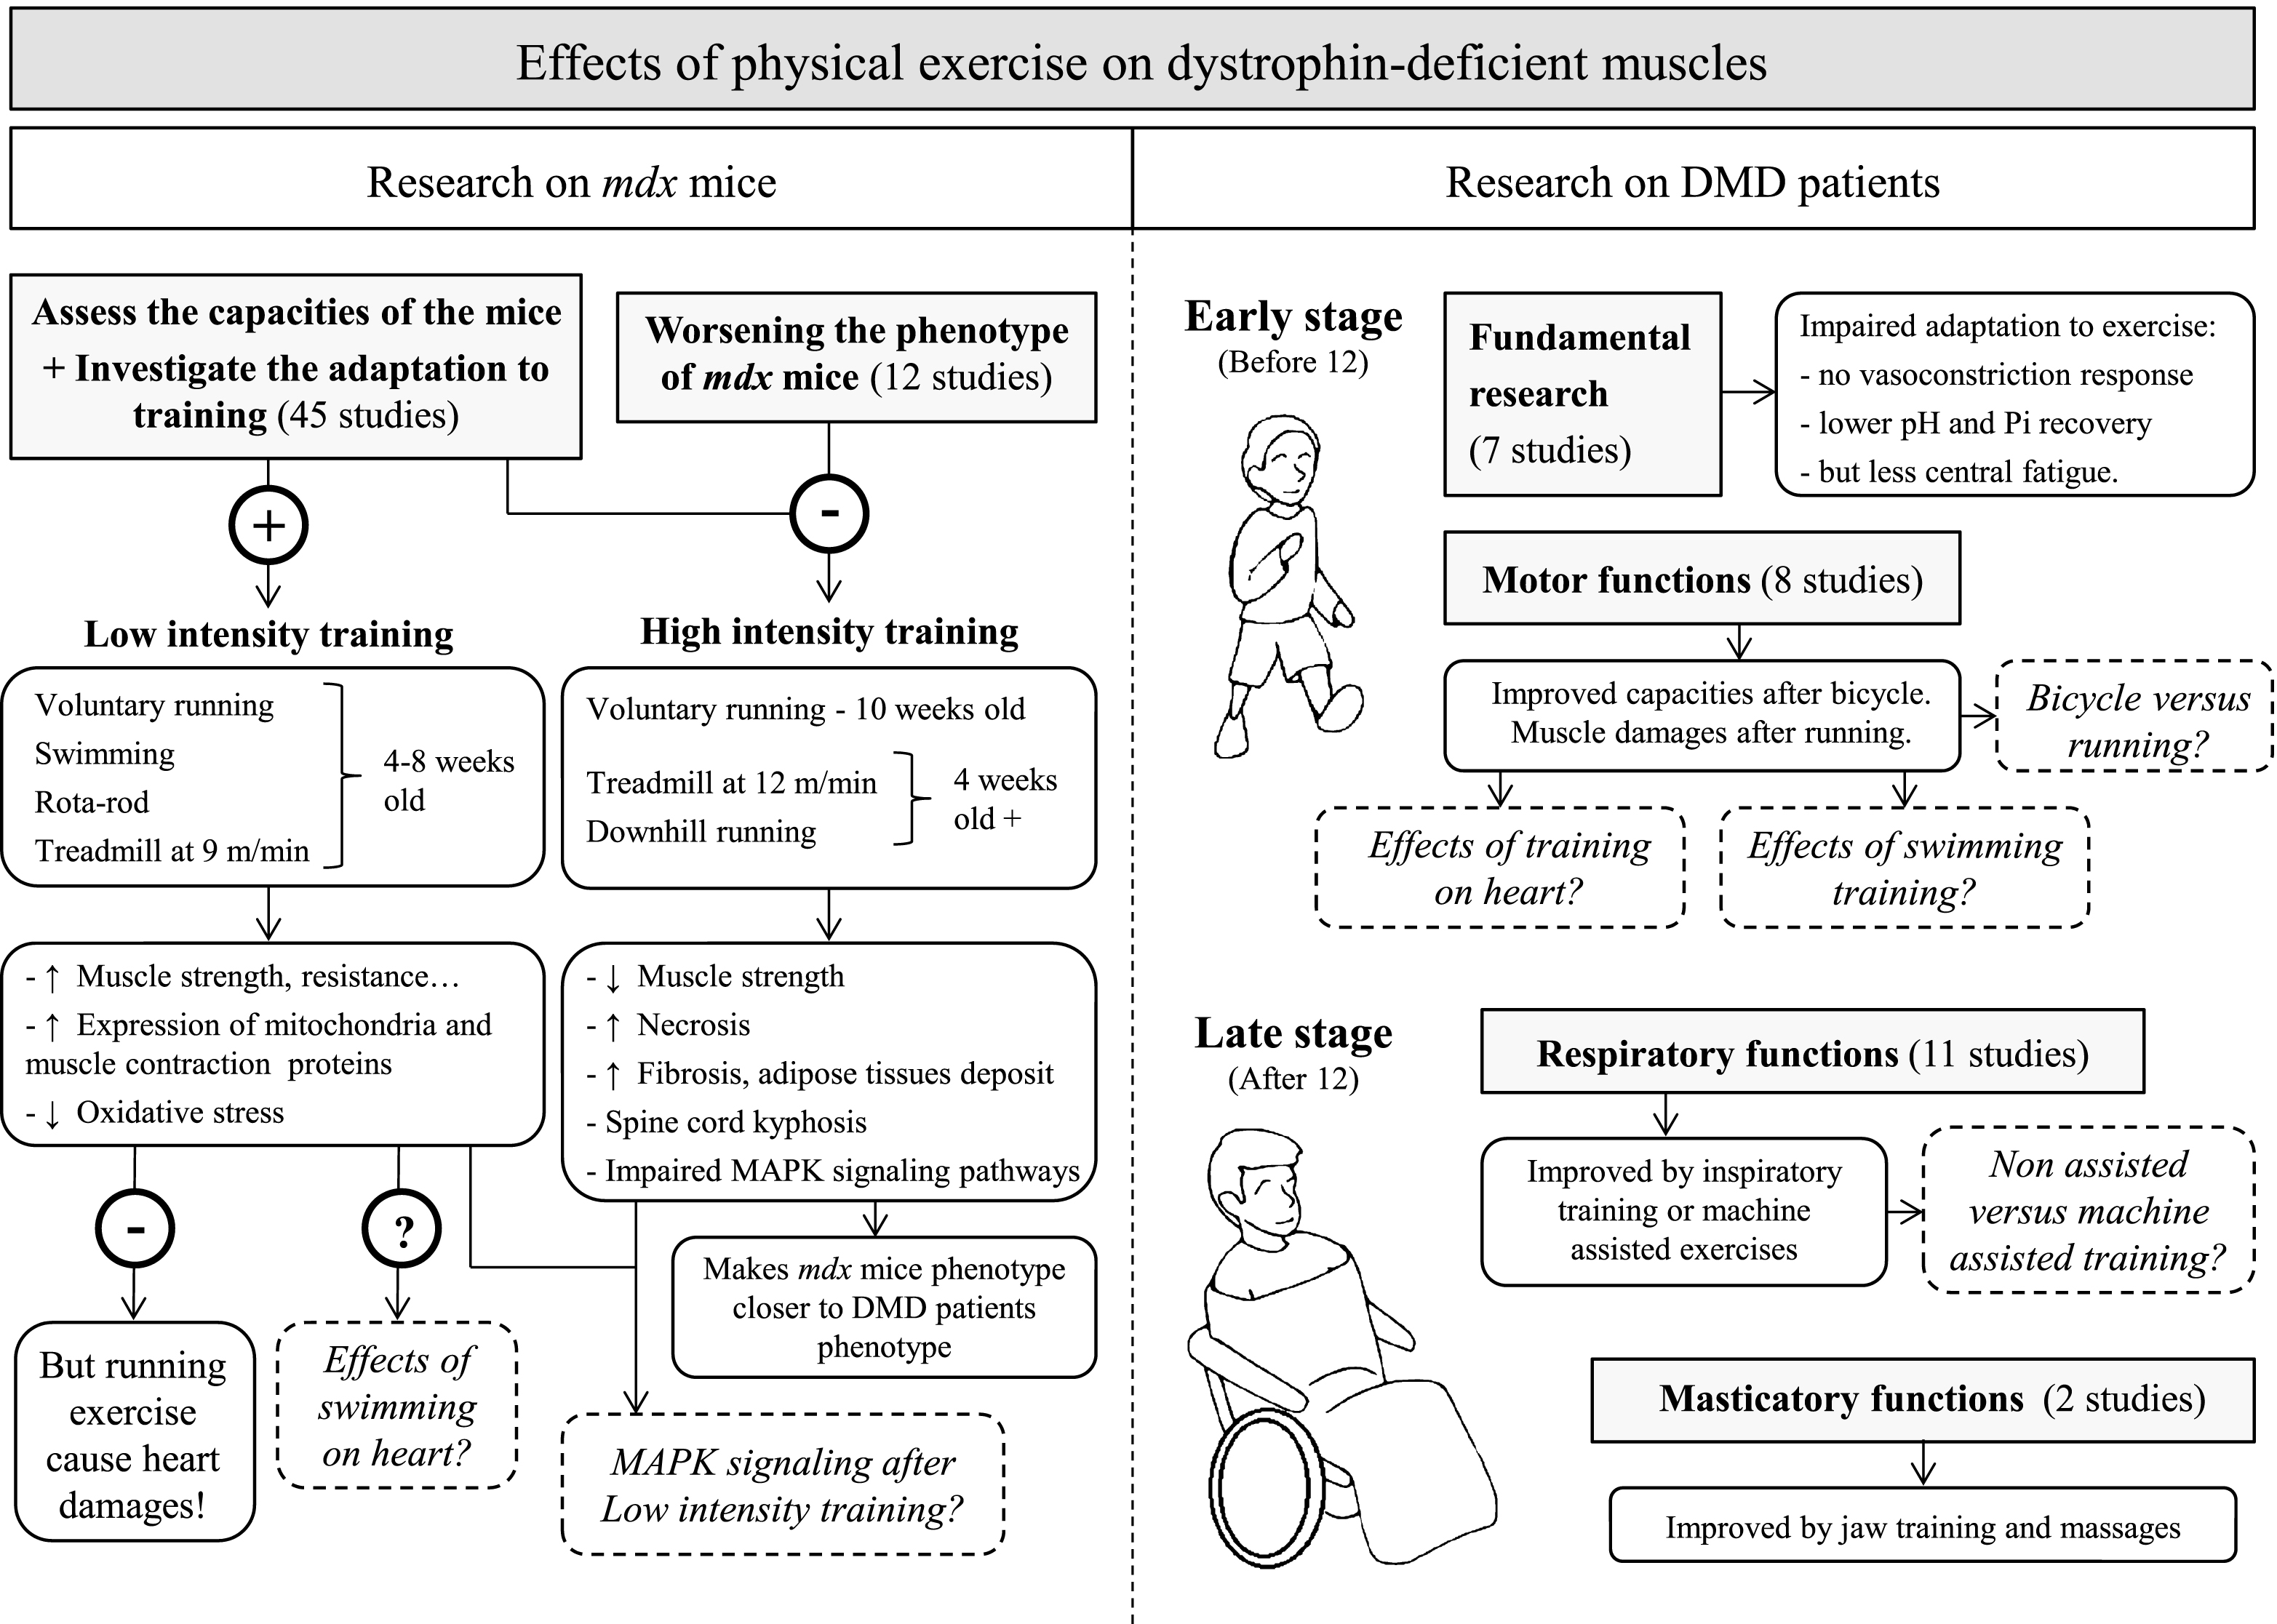 Schematic summarizing the effects of physical exercise on dystrophin-deficient muscles. Results from studies investigating the effects of physical exercise on muscles in mdx mice (left panel) and DMD patients (right panel). Dotted lines represent open questions.